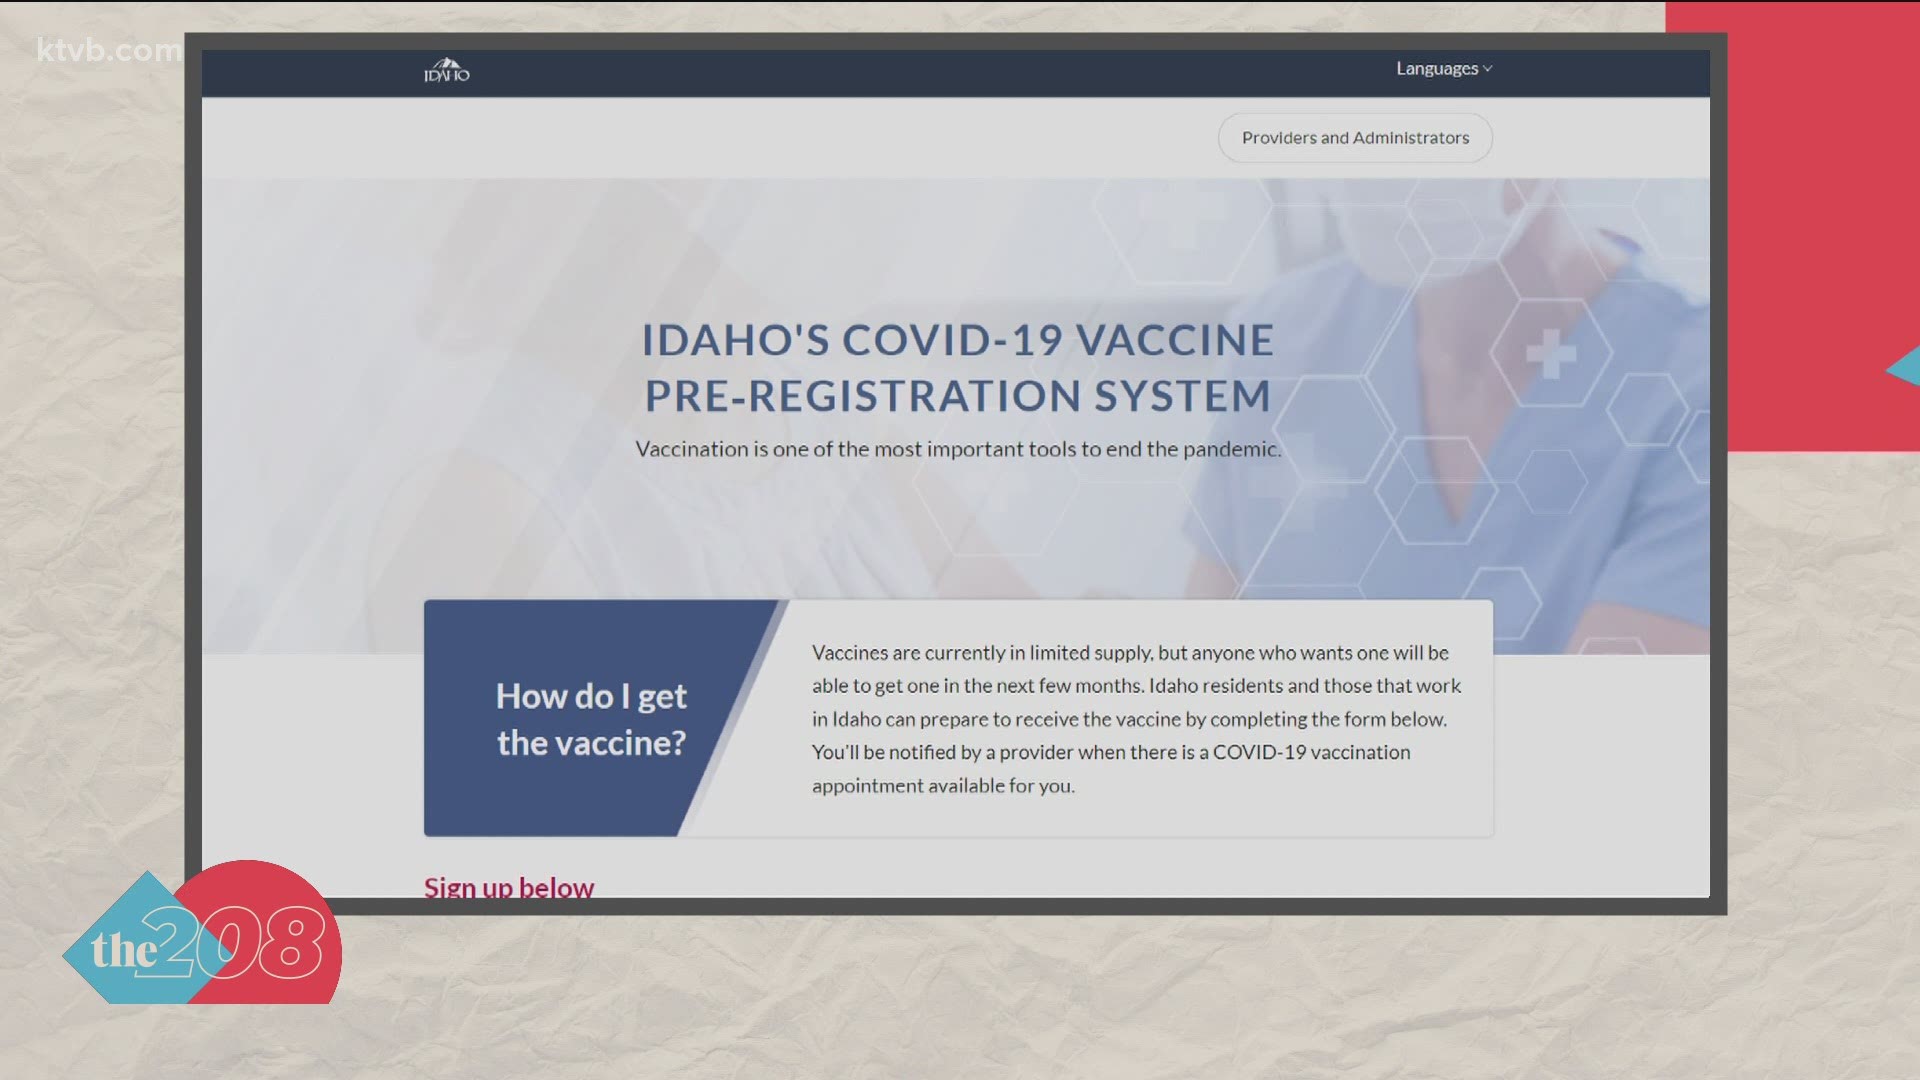 After the state had a difficult time rolling out the vaccine for seniors, Idaho is launching a new site for people to pre-register for a vaccine appointment.